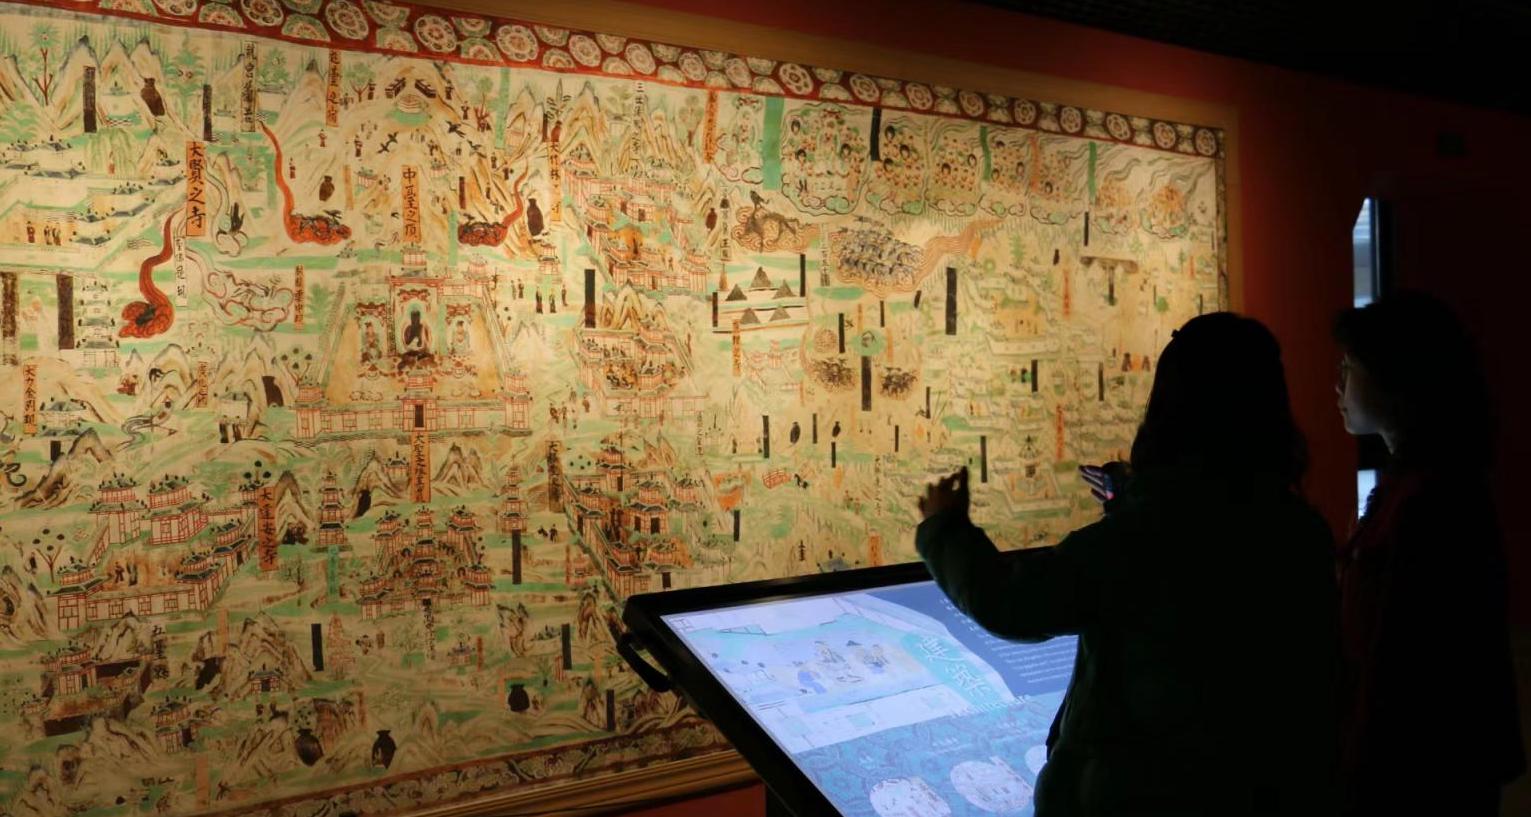 Digital Dunhuang Exhibition attracts visitors to tour Dunhuang in an immersive way